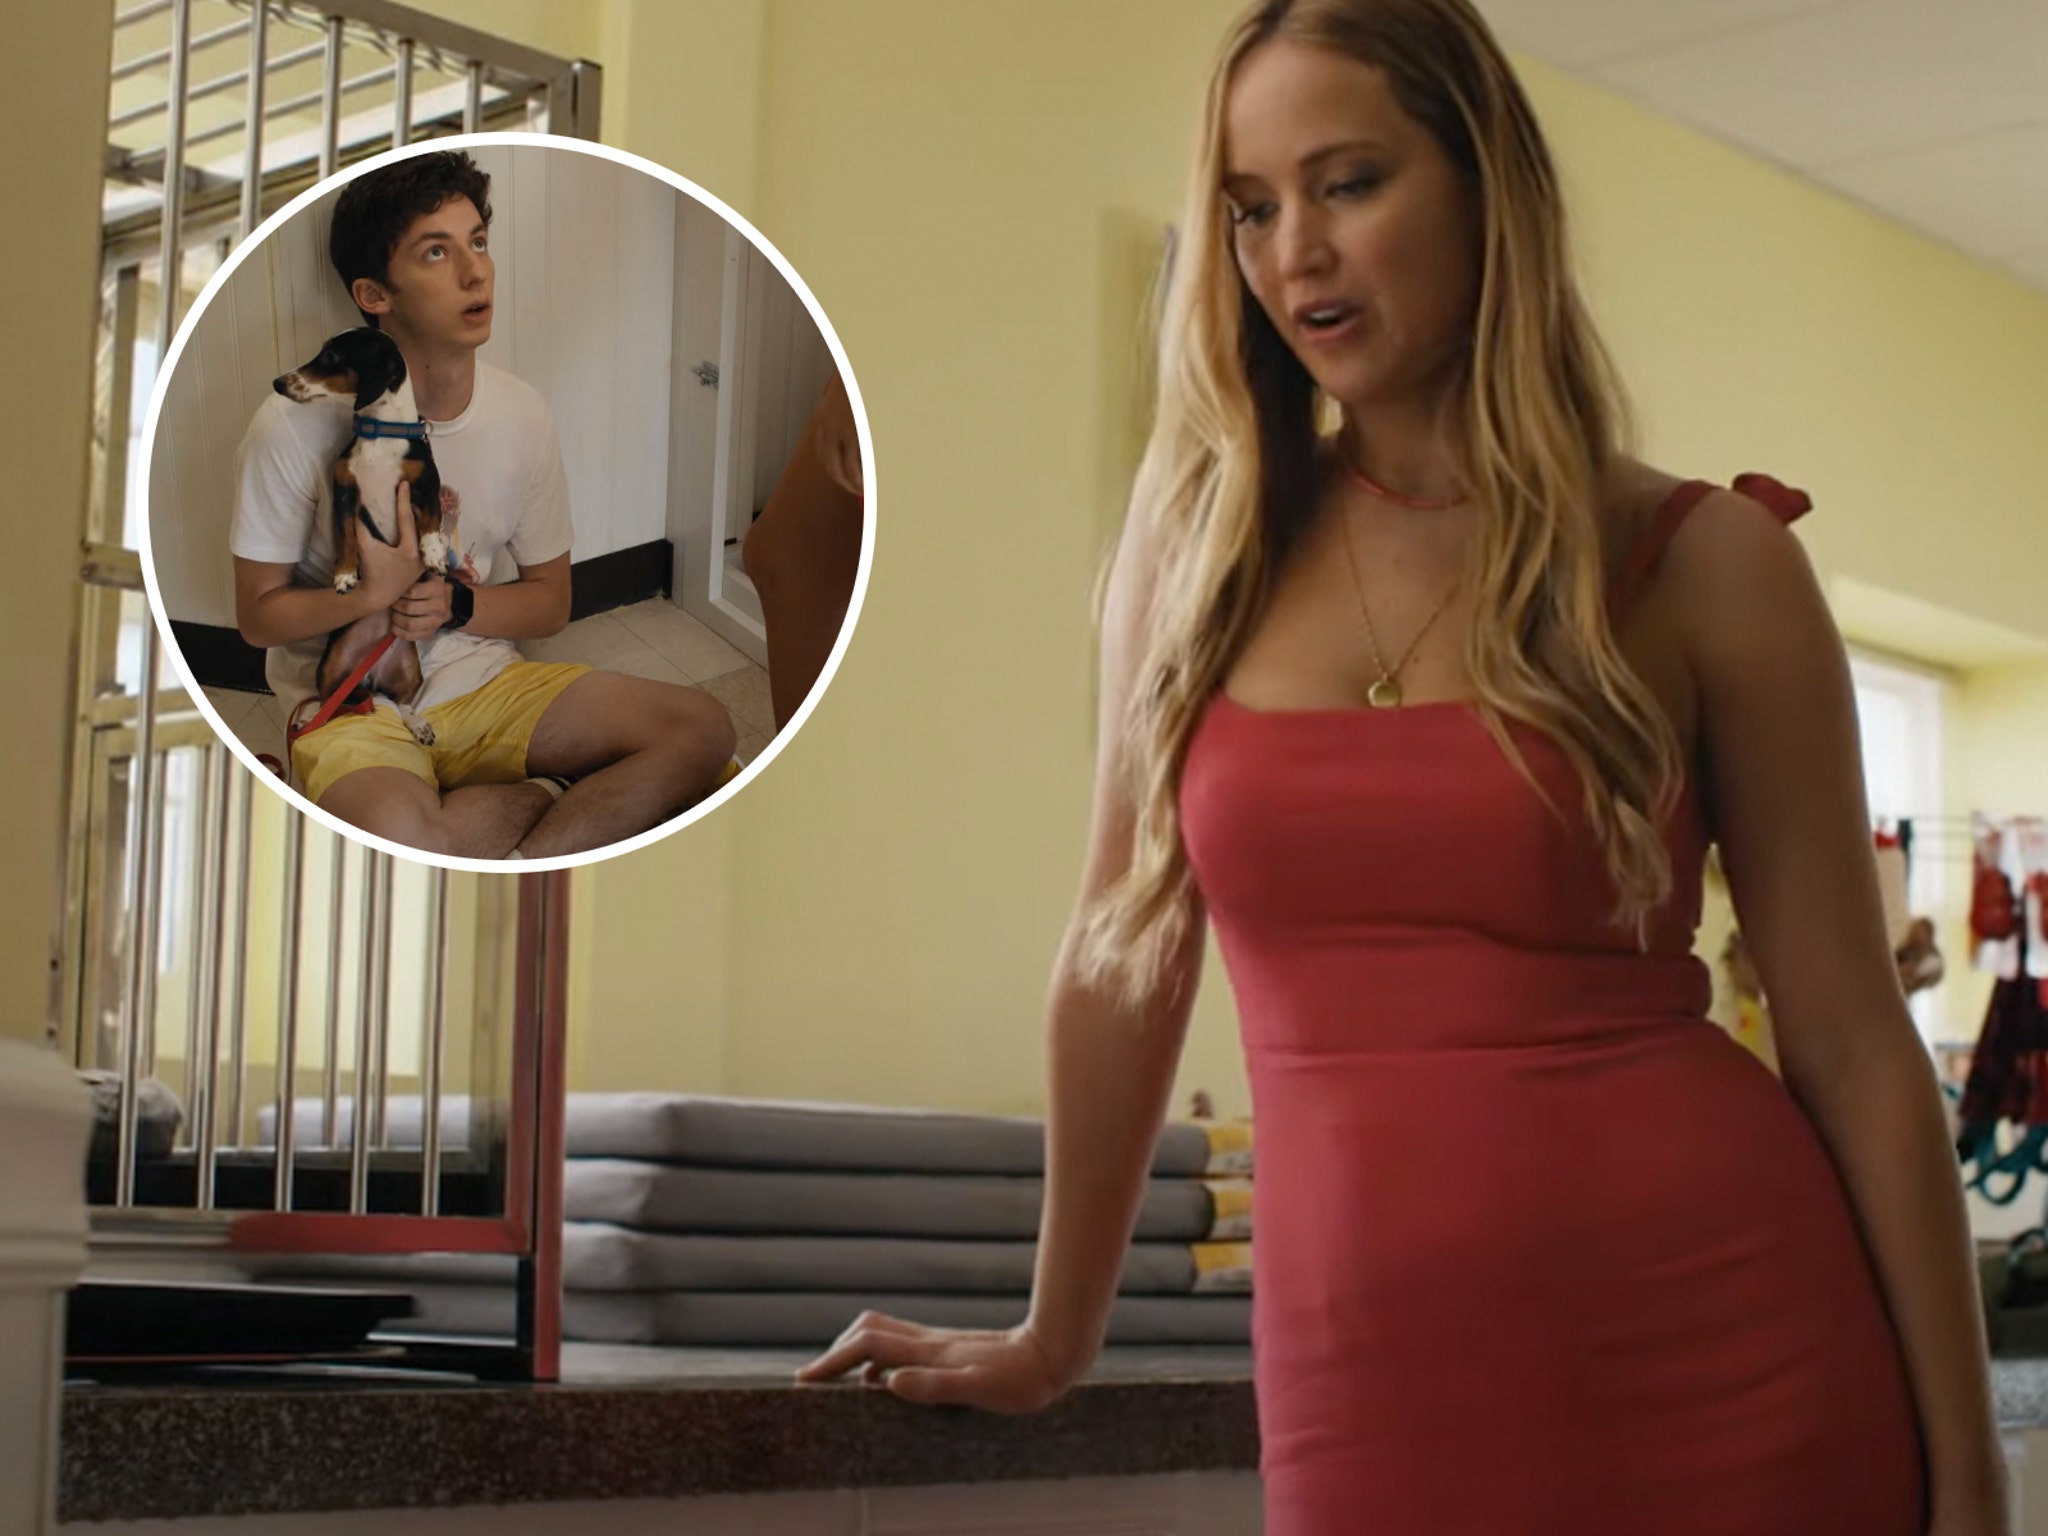 No Hard Feelings': Watch the Trailer for Jennifer Lawrence's Raunchy New  Comedy